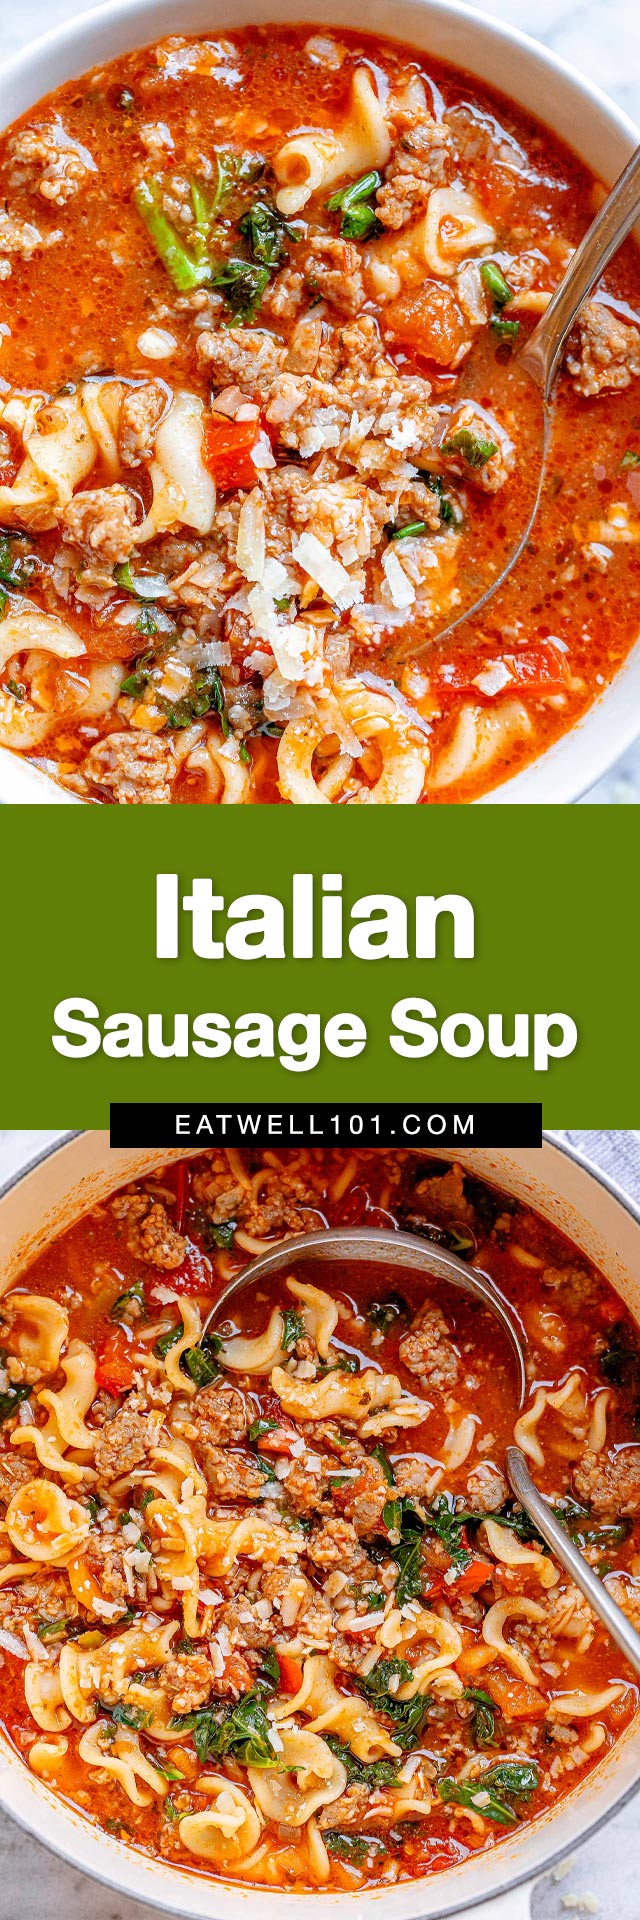 Italian sausage soup recipe - #italian #sausage #soup #recipe #eatwell101 - Make this comforting sausage soup right at home in less than 30 minutes!